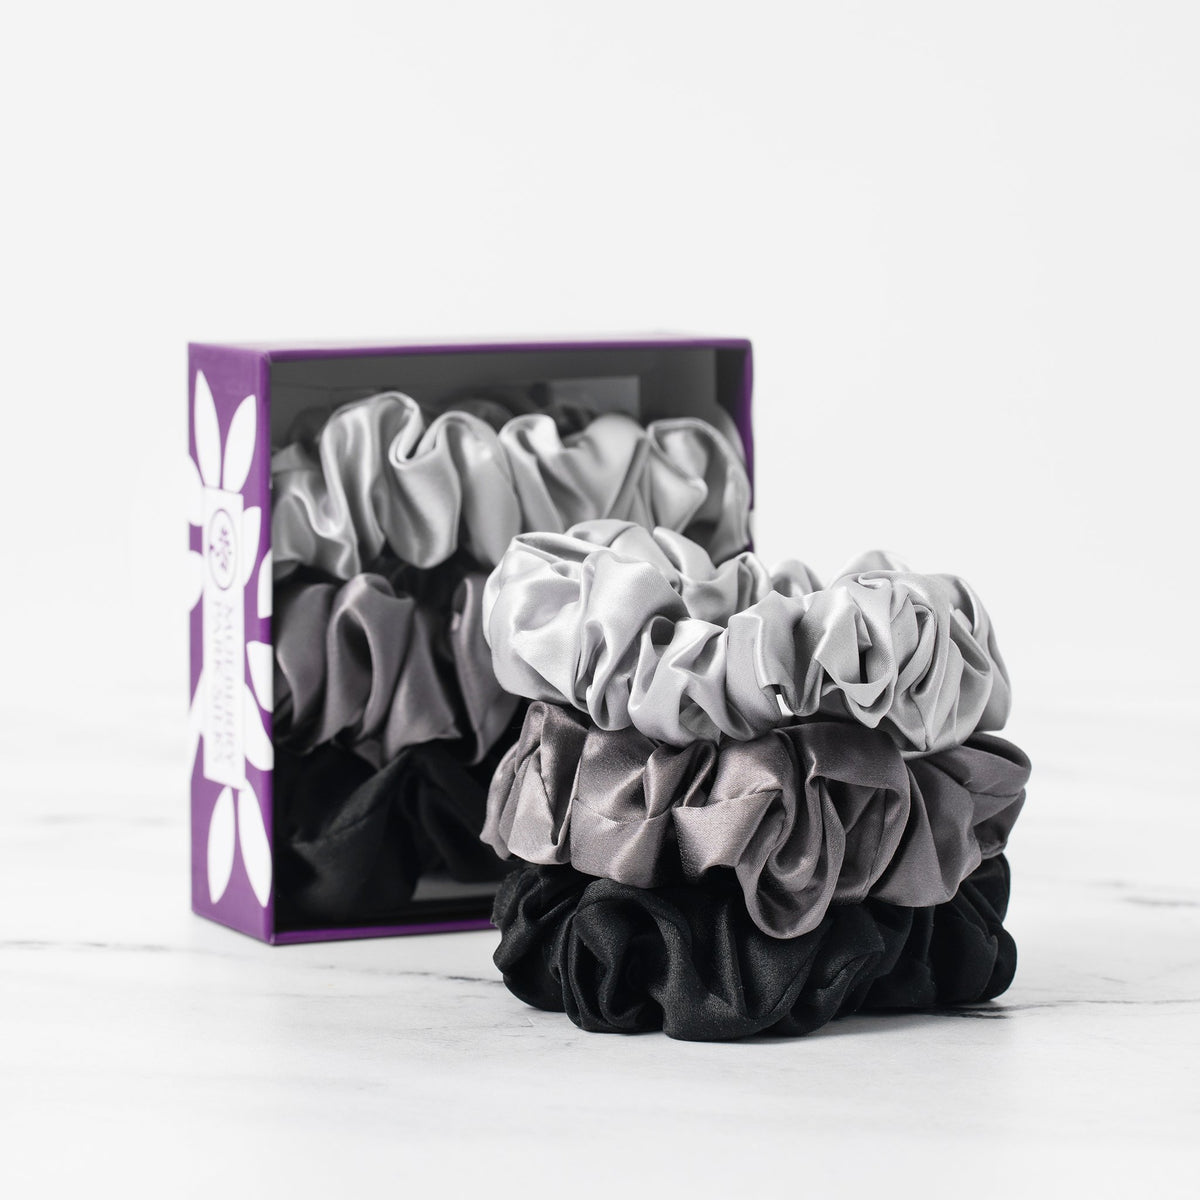 Mulberry Park Silks Silk Scrunchies - Midnight Black, Shimmery Silver, and Gunmetal Grey Large Stack in Box